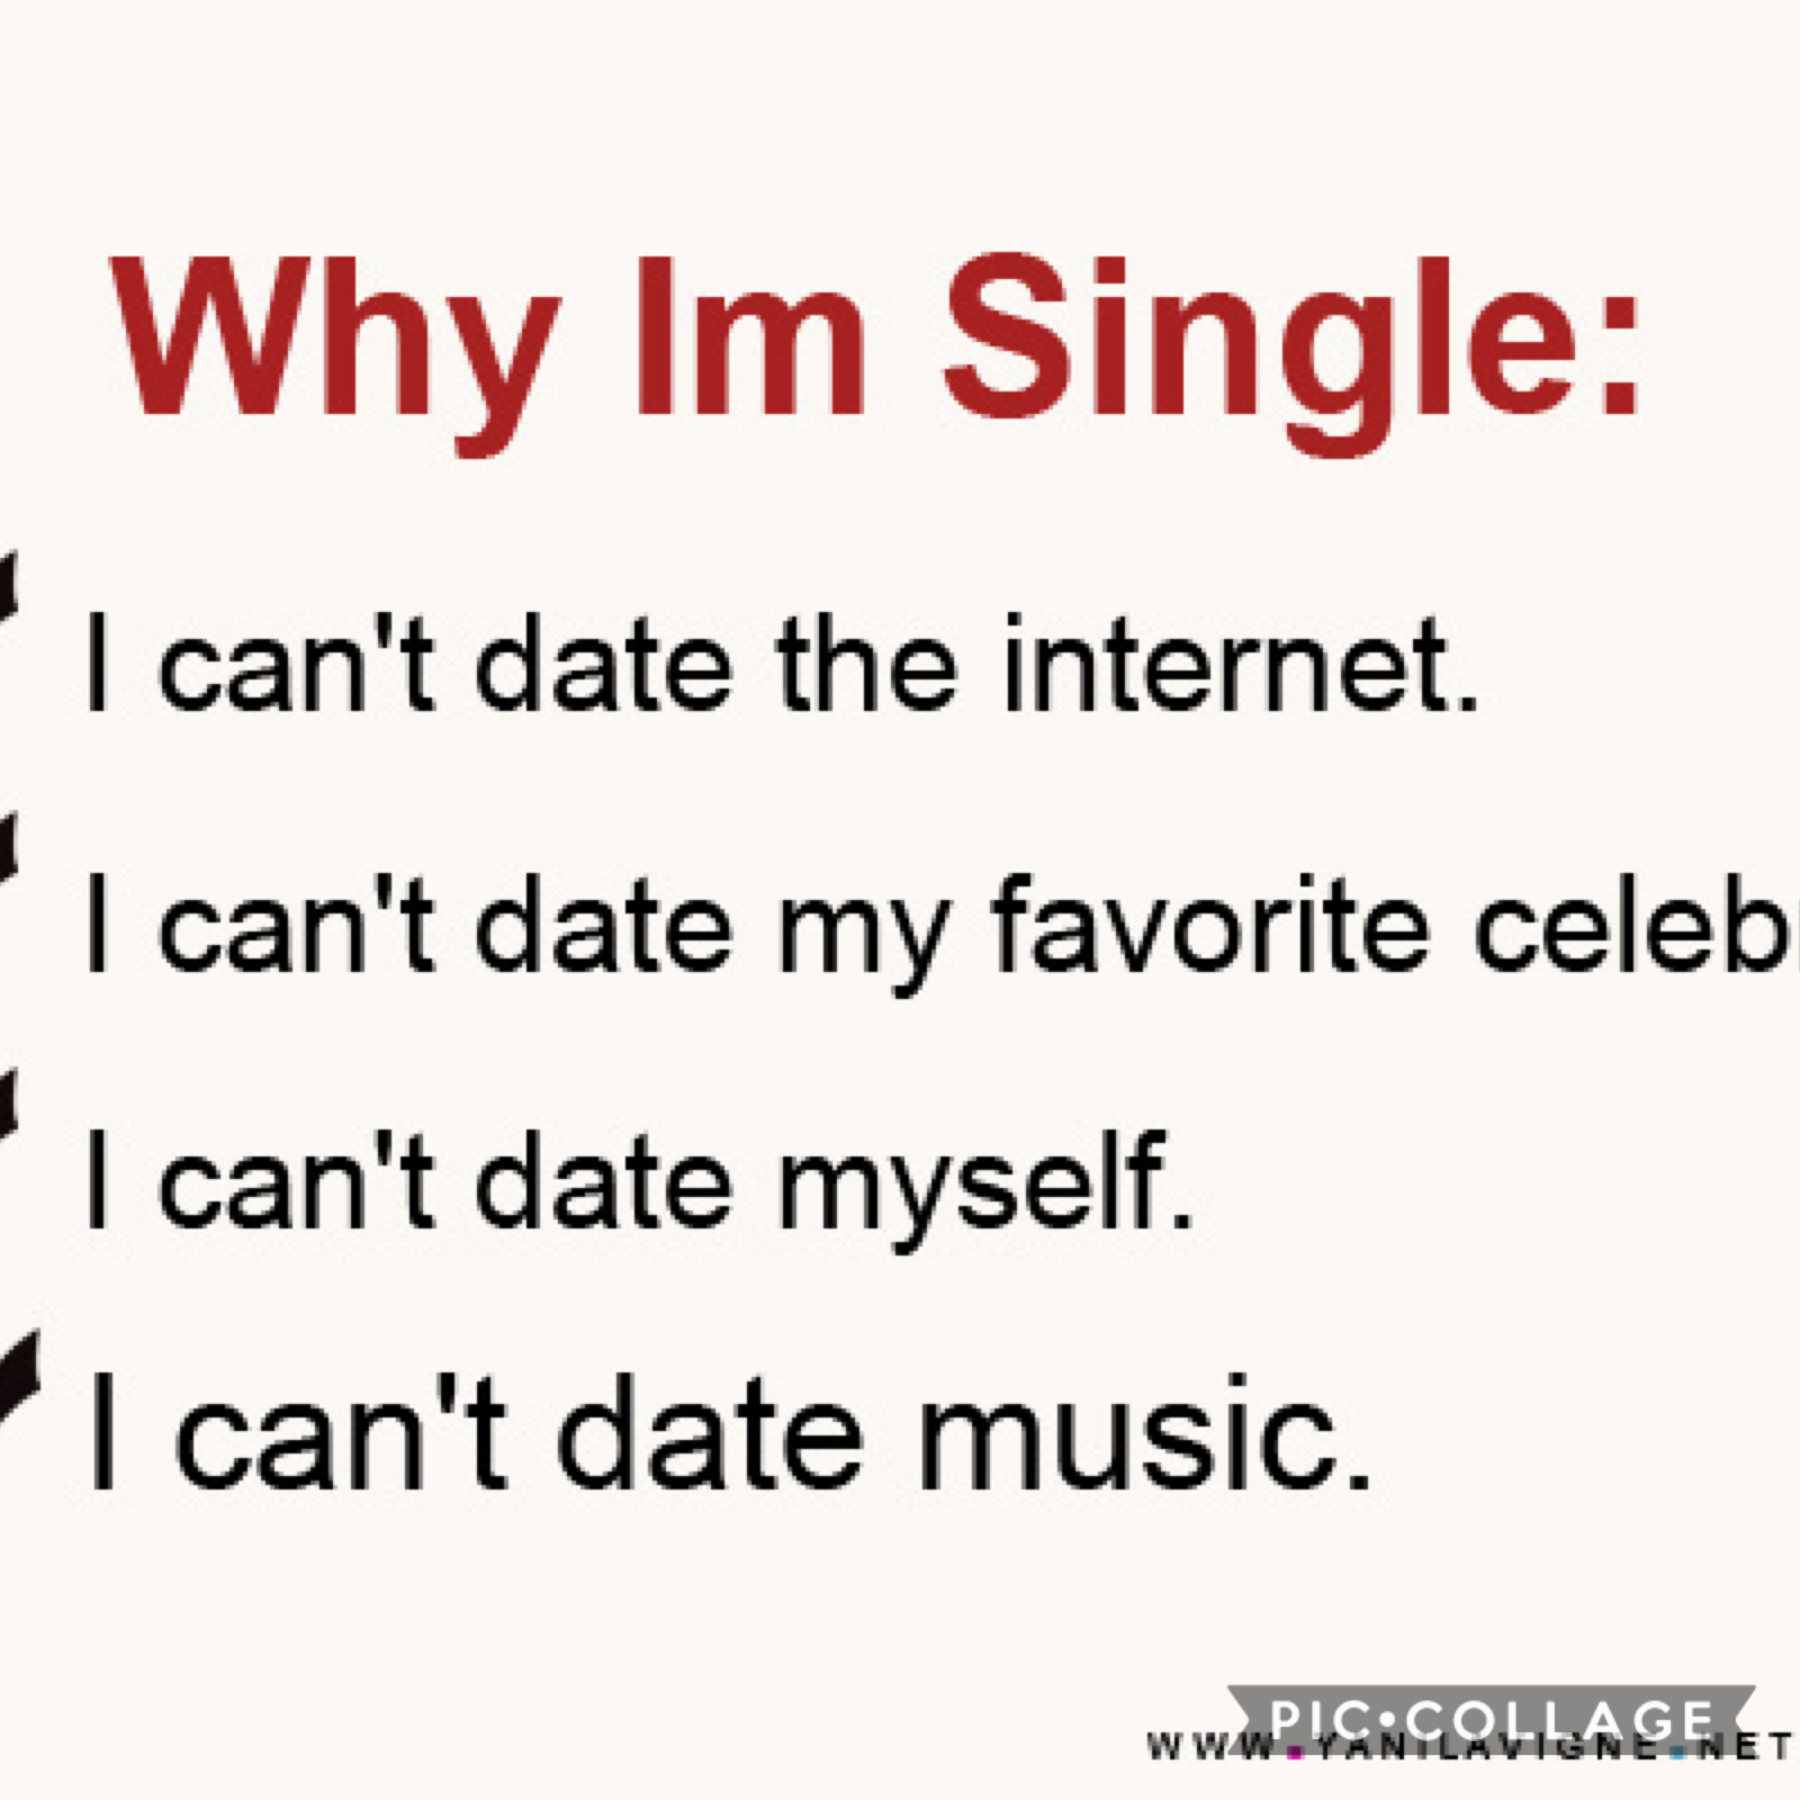 This is me 🙄 and this is why I’m single 😂 